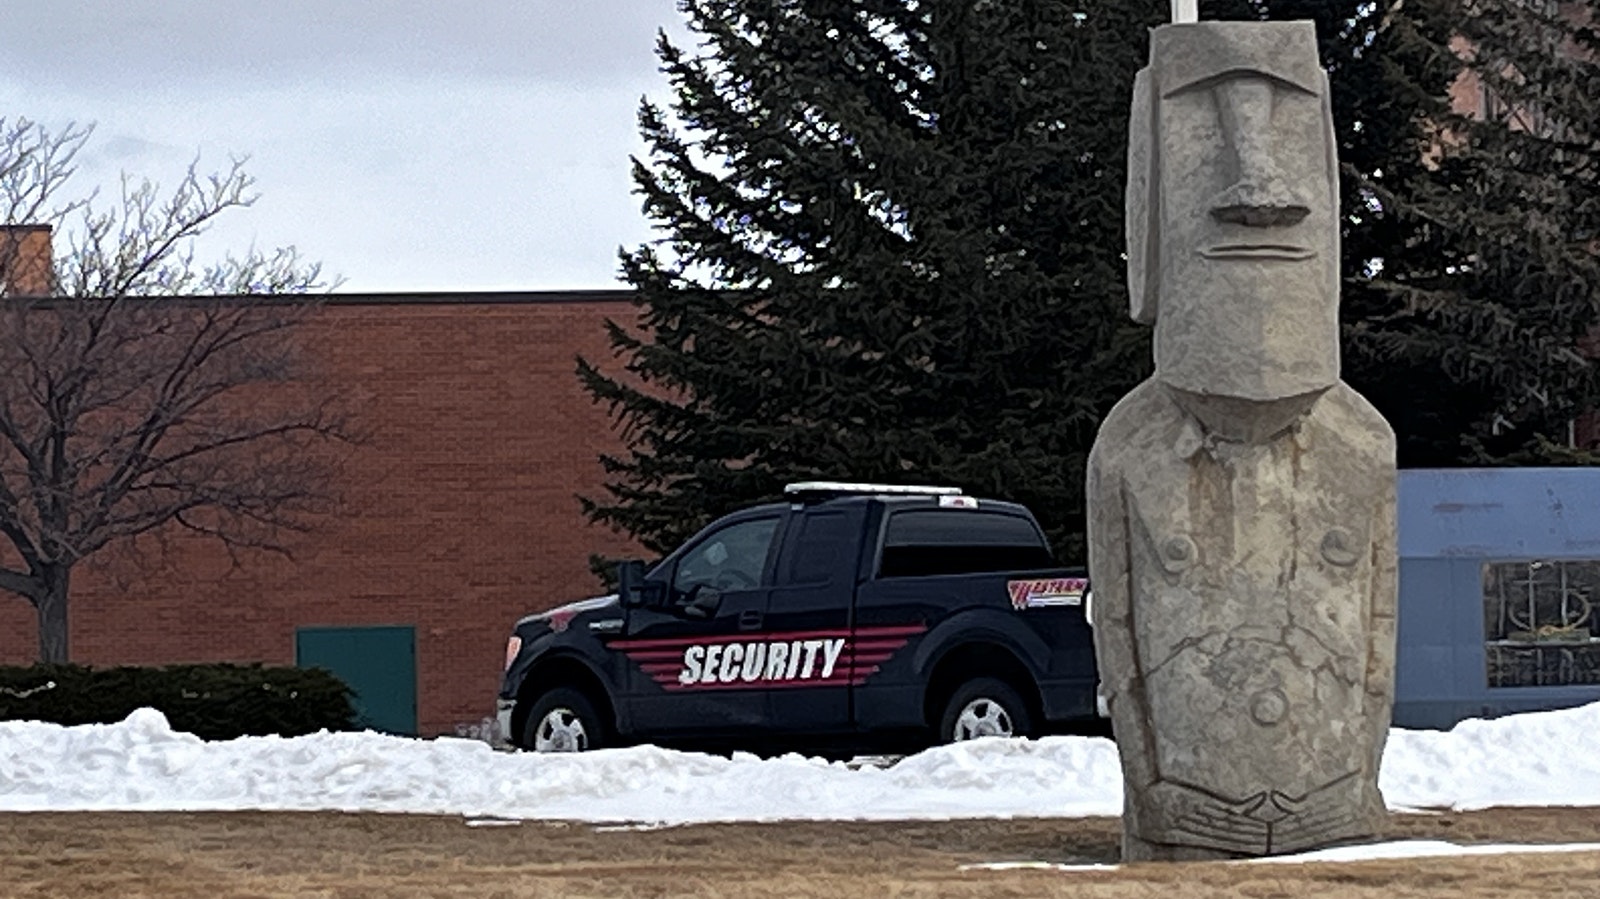 One of a pair of giant 9-ton Moai statues on the campus of Western Wyoming Community College in Rock Springs. They were built in 1987 but, like the Easter Island heads they resemble, why they're there is a mystery.